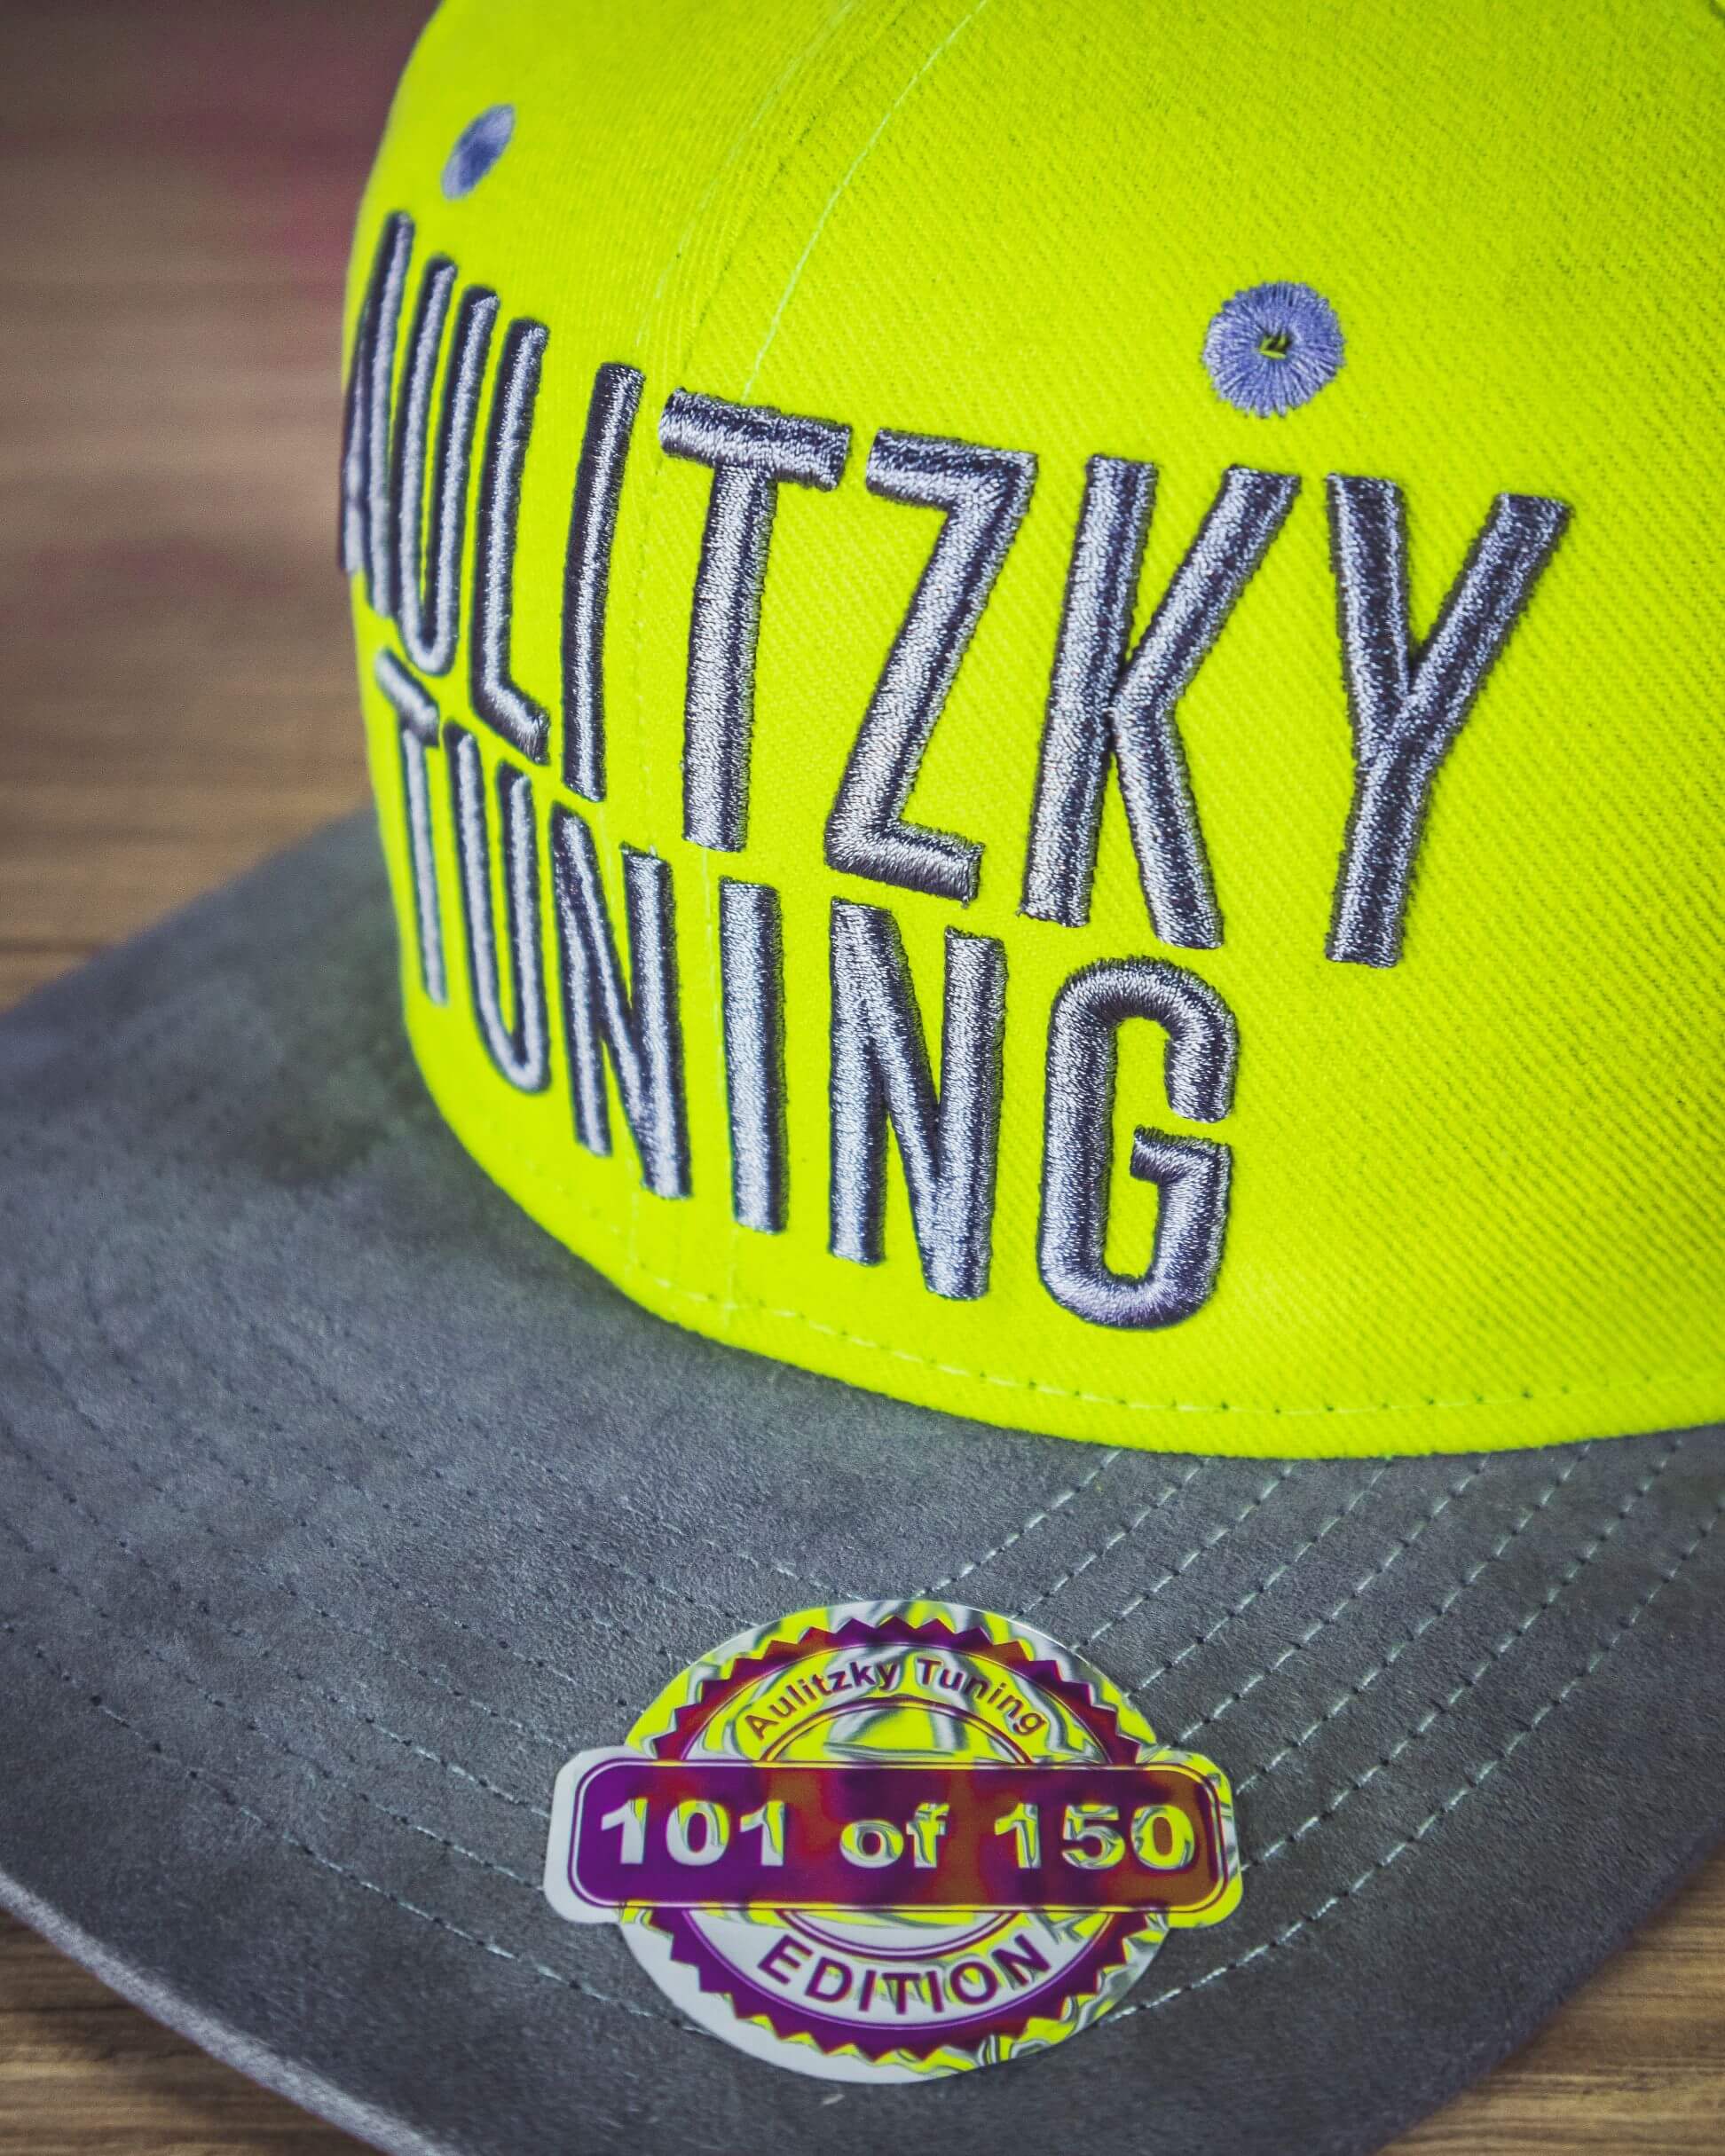 Aulitzky Tuning  | AT-Limi Snapback Limited |  #one of 150 | Restock!